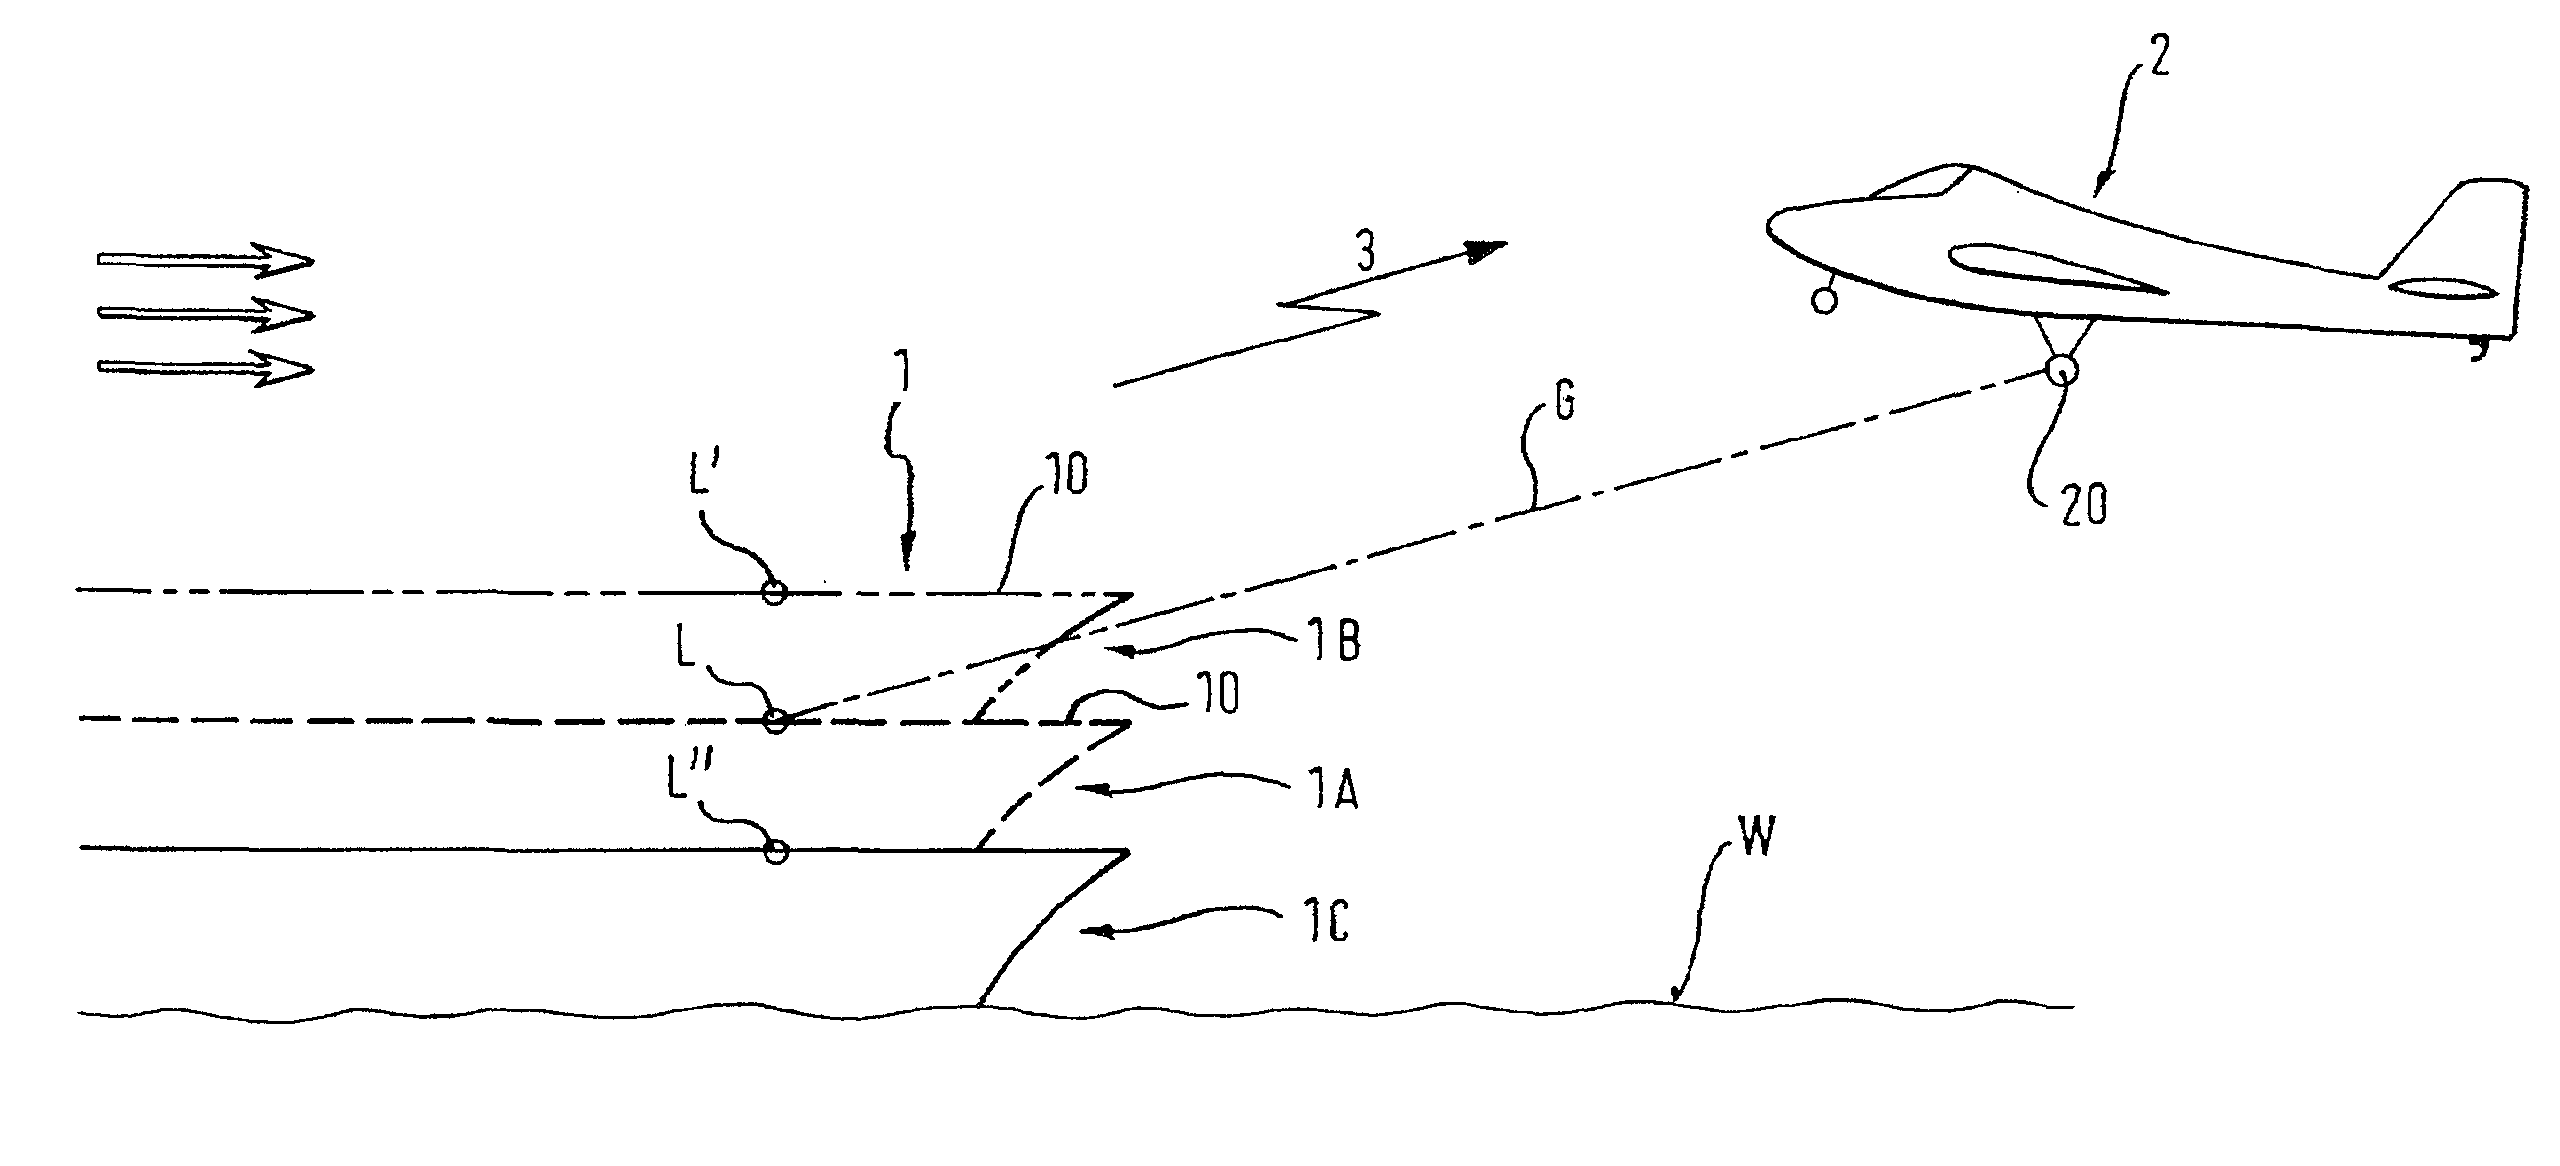 Procedure for Automatically Landing an Aircraft